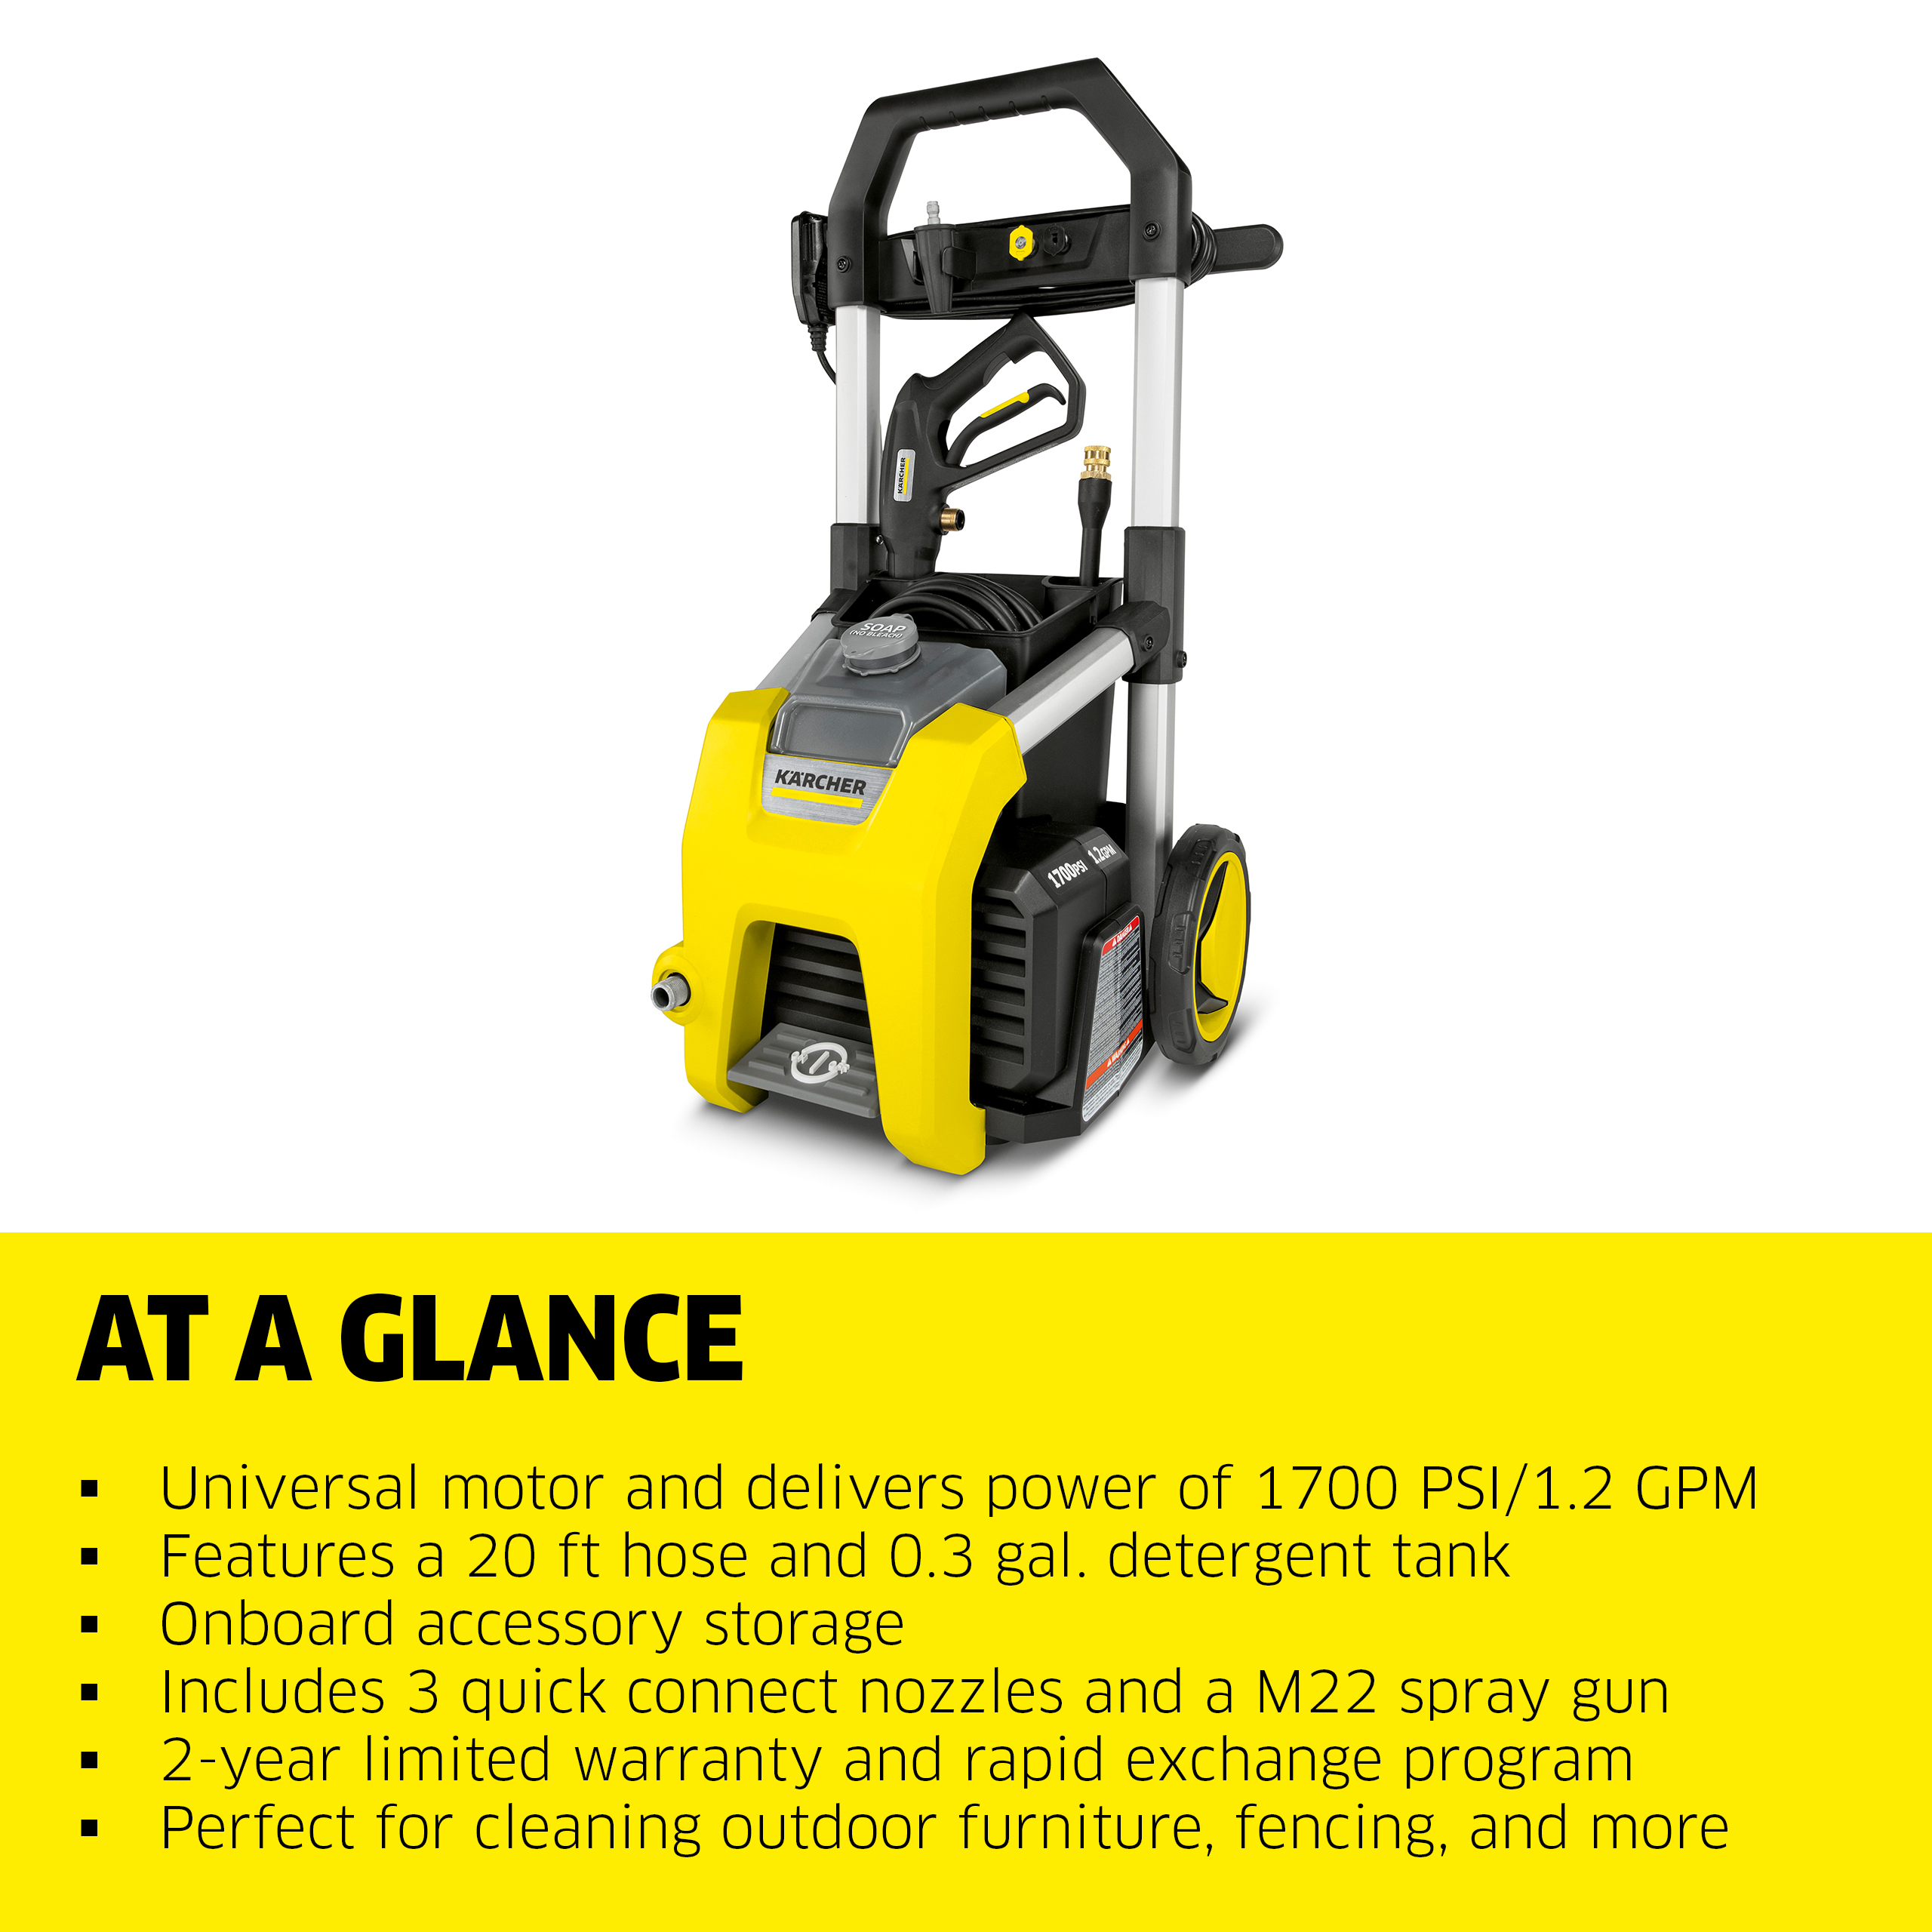 Karcher K1700 2125 PSI Max, Electric Pressure Washer with Hose and 3 Nozzles, 1.2 GPM, Power Washer - image 4 of 9